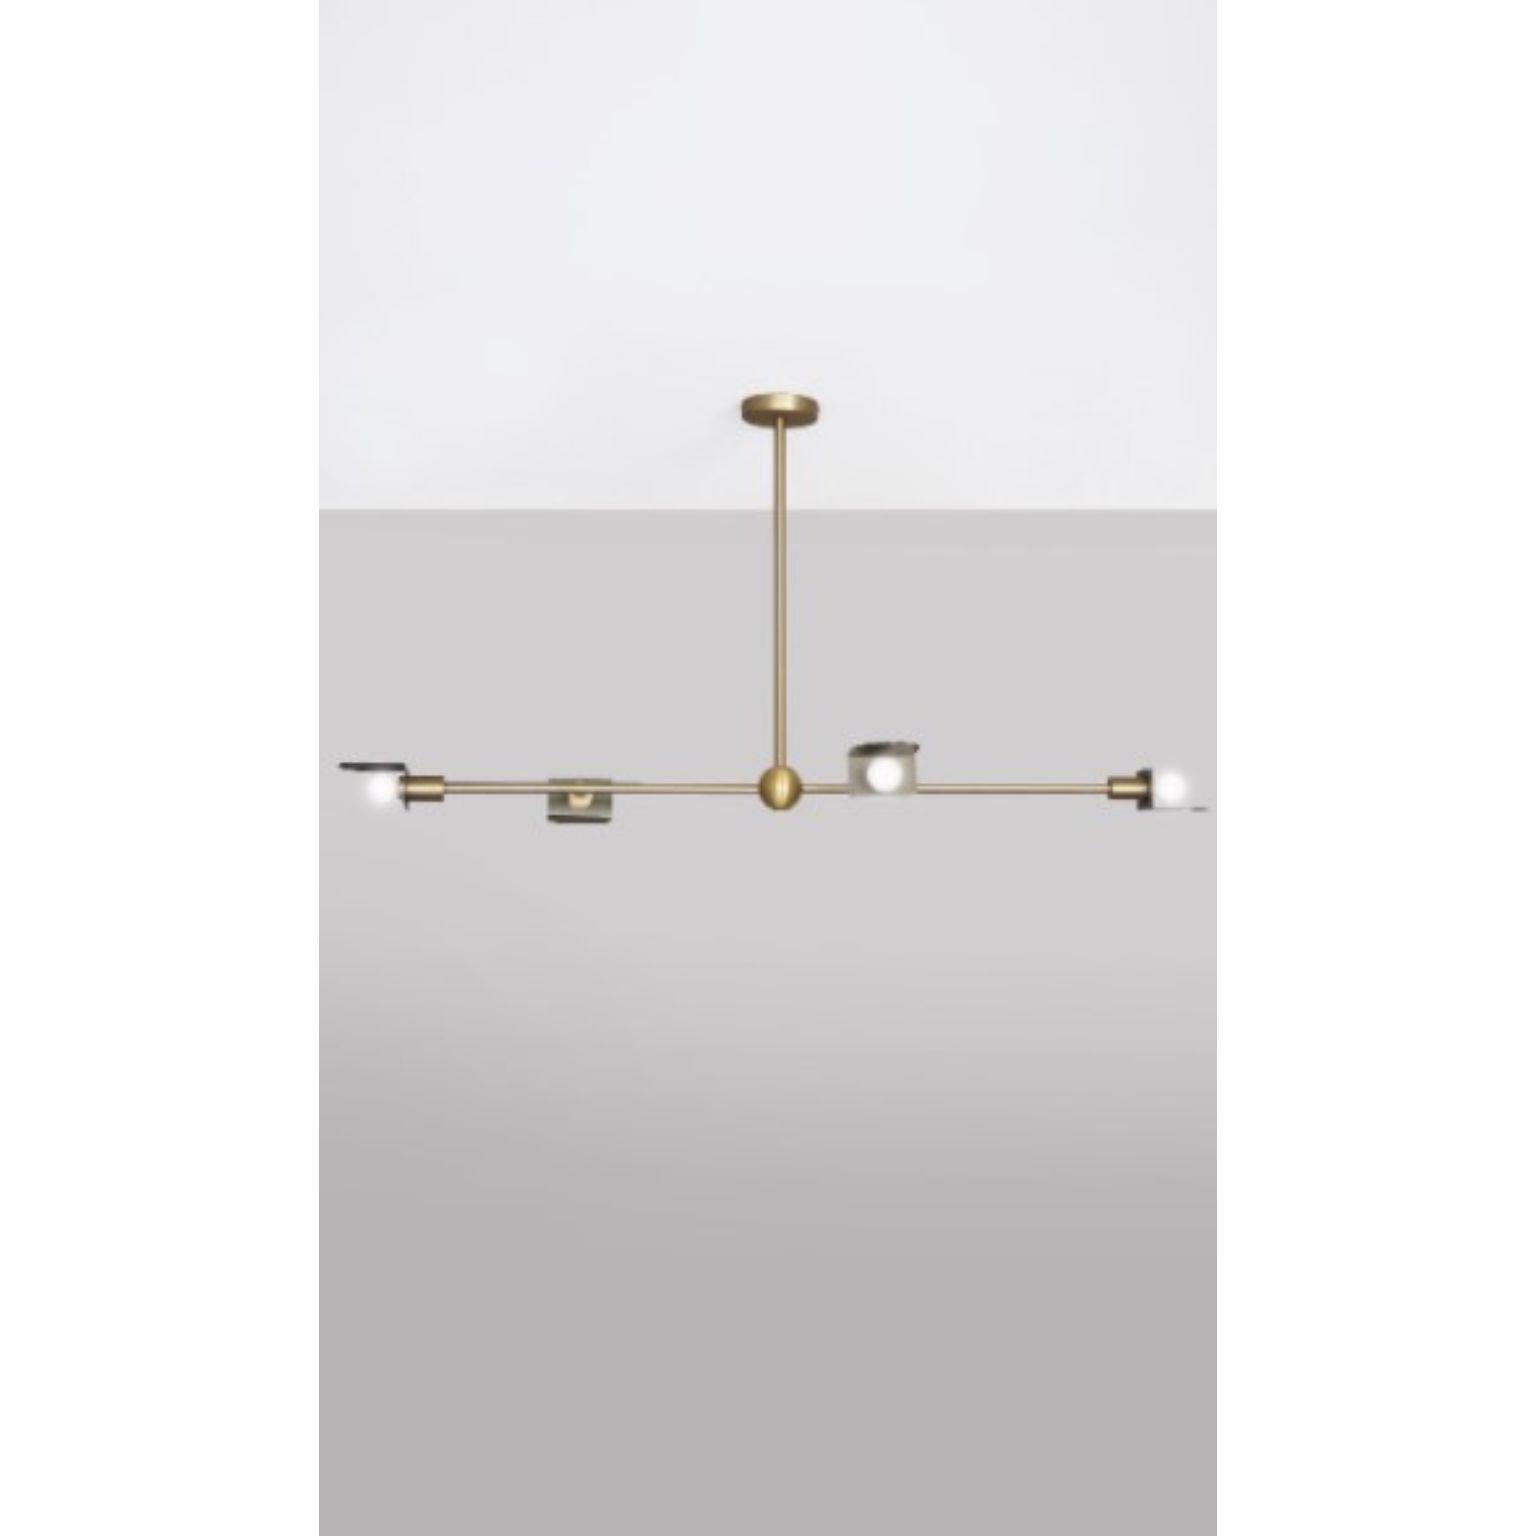 Route I pendant light by square in circle
Dimensions: D117 x W6 x H63 cm
Materials: Brushed brass/ brushed grey metal
Other finishes available.

An ambitious linear pendant displaying geometric semicircular metal shades with returns. This